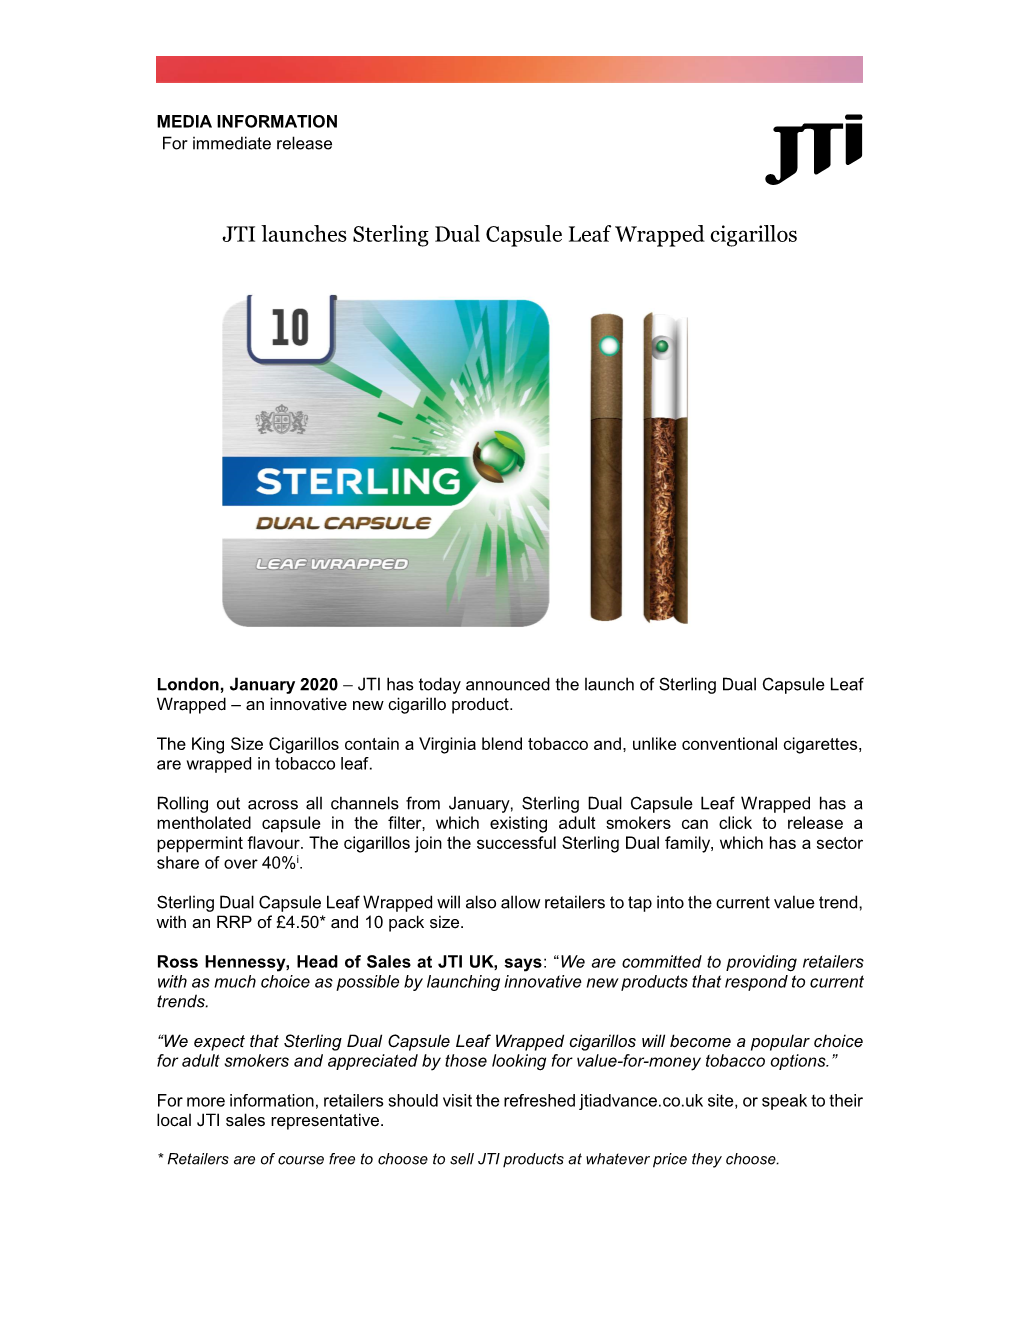 JTI Launches Sterling Dual Capsule Leaf Wrapped Cigarillos